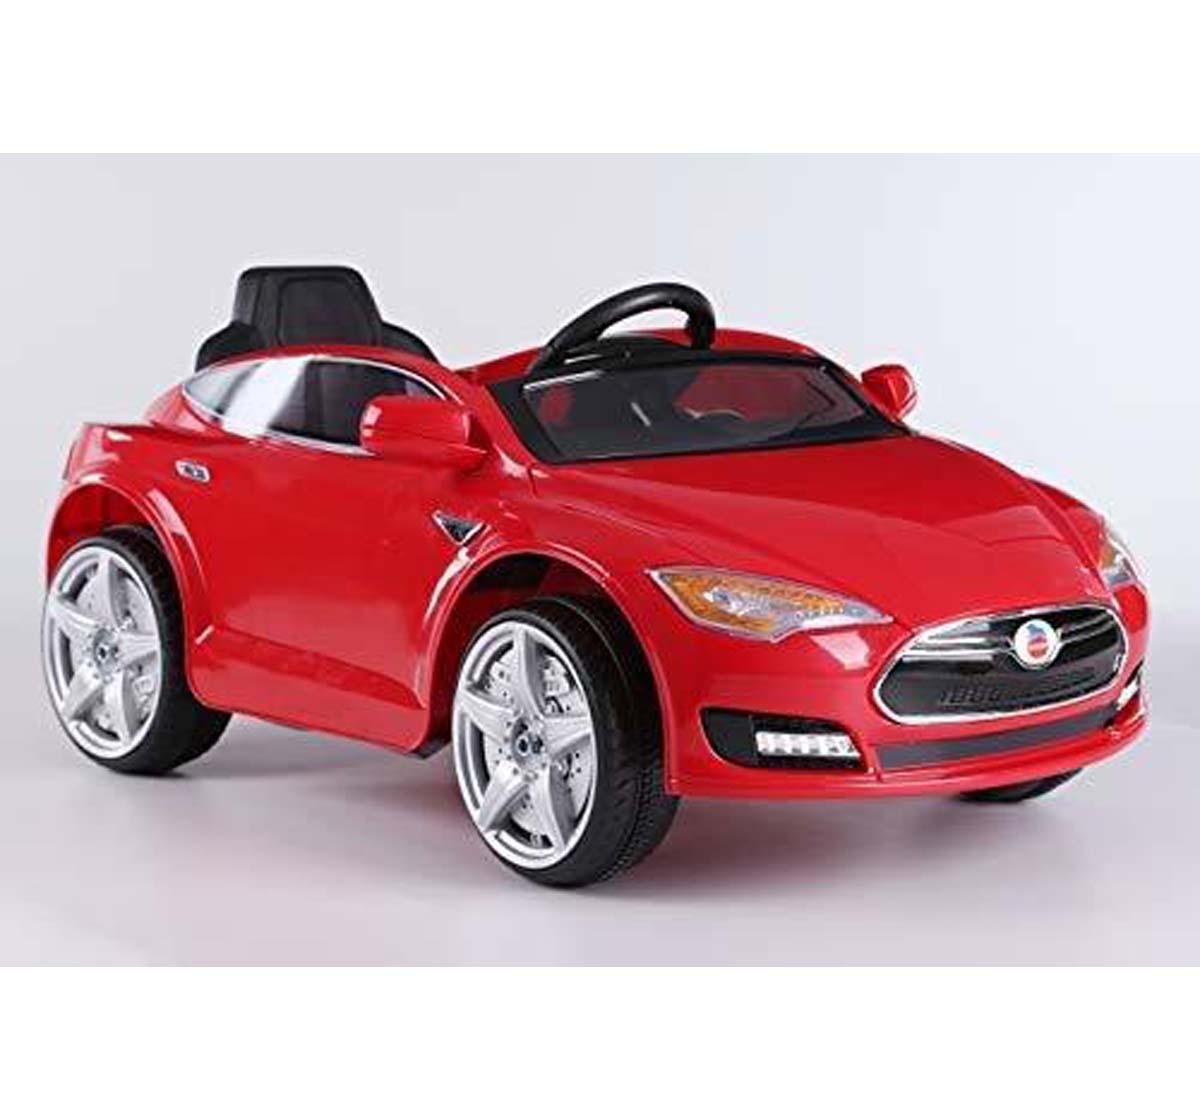 B:Wild Sedan Battery Operated Ride-On Car for Kids Age 3Y+